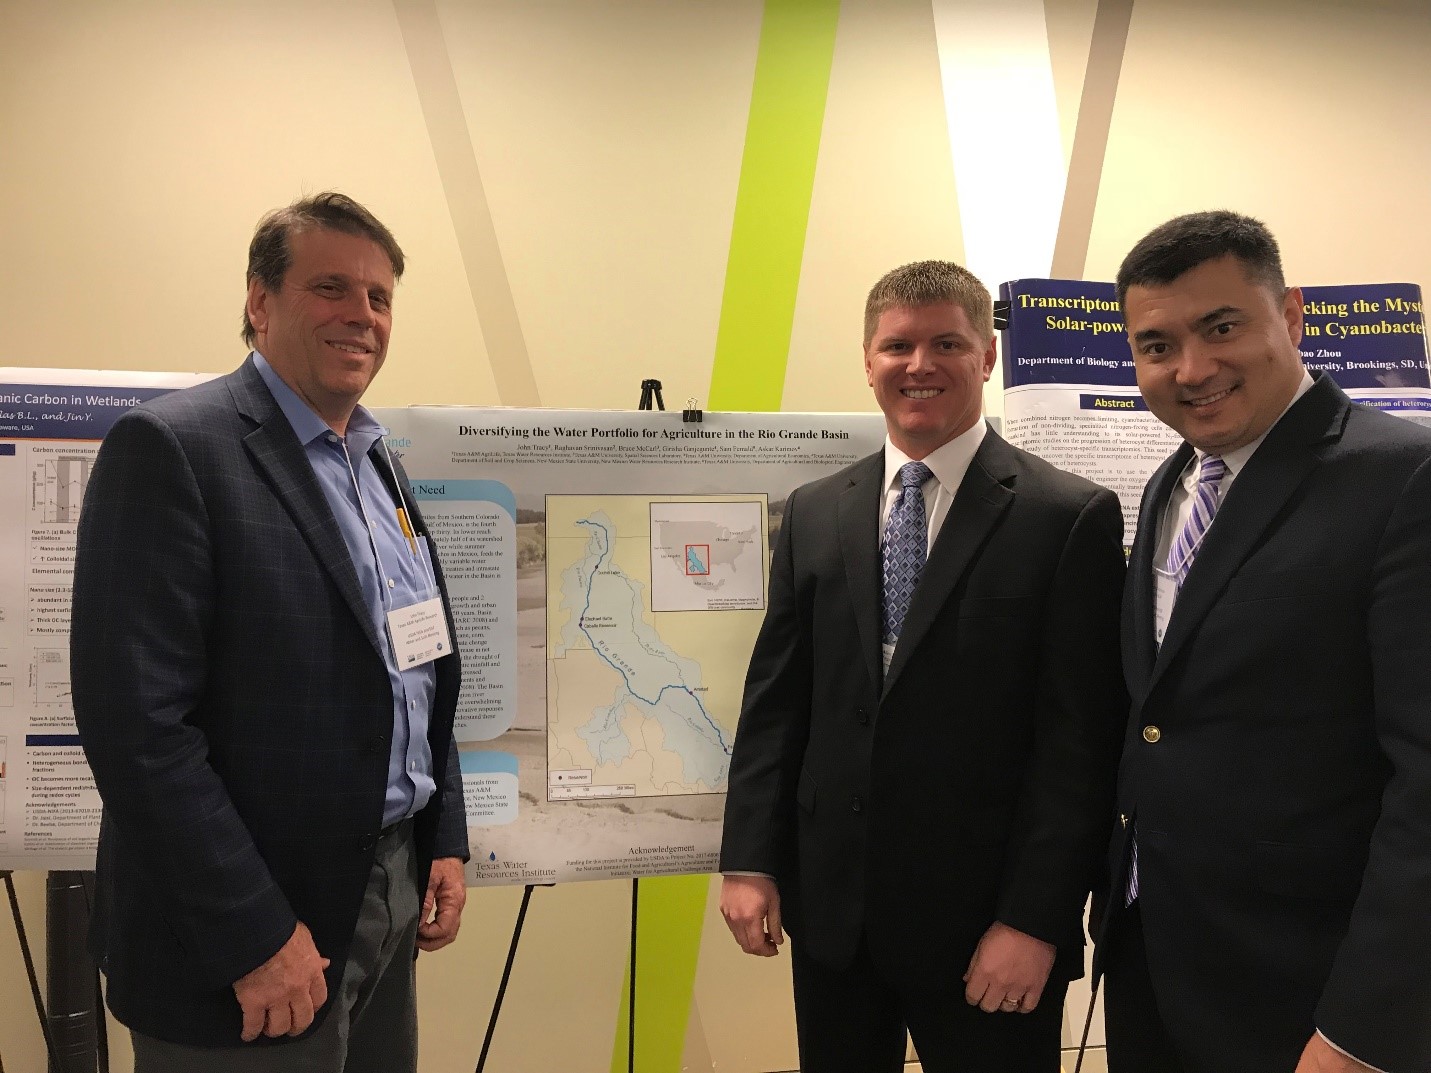 Three men in suits are standing by a map of a river system.